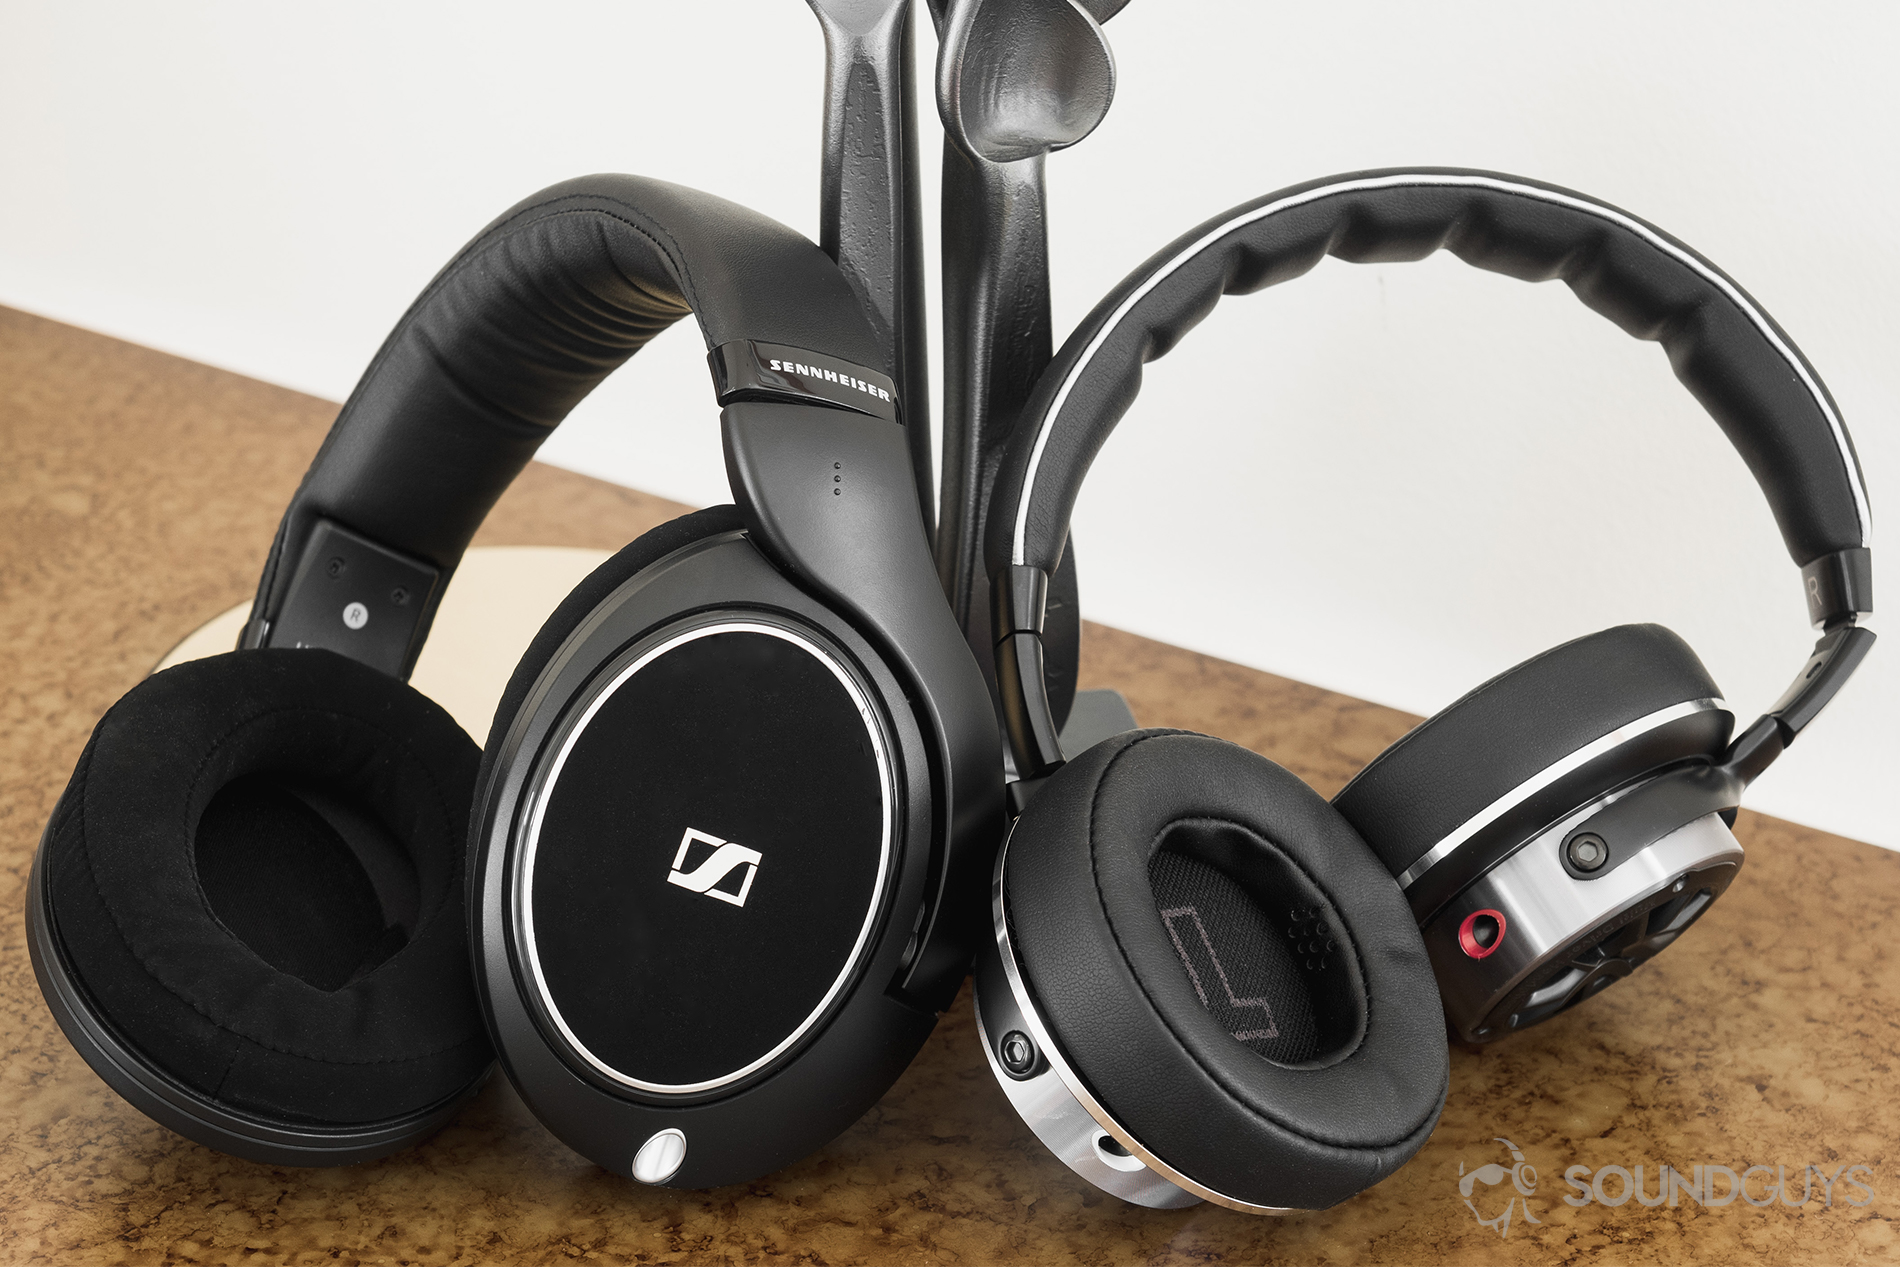 1More Triple-Driver Over-Ear review: The Sennheiser HD 598 CS headphones adjacent to the 1More Over-Ear.